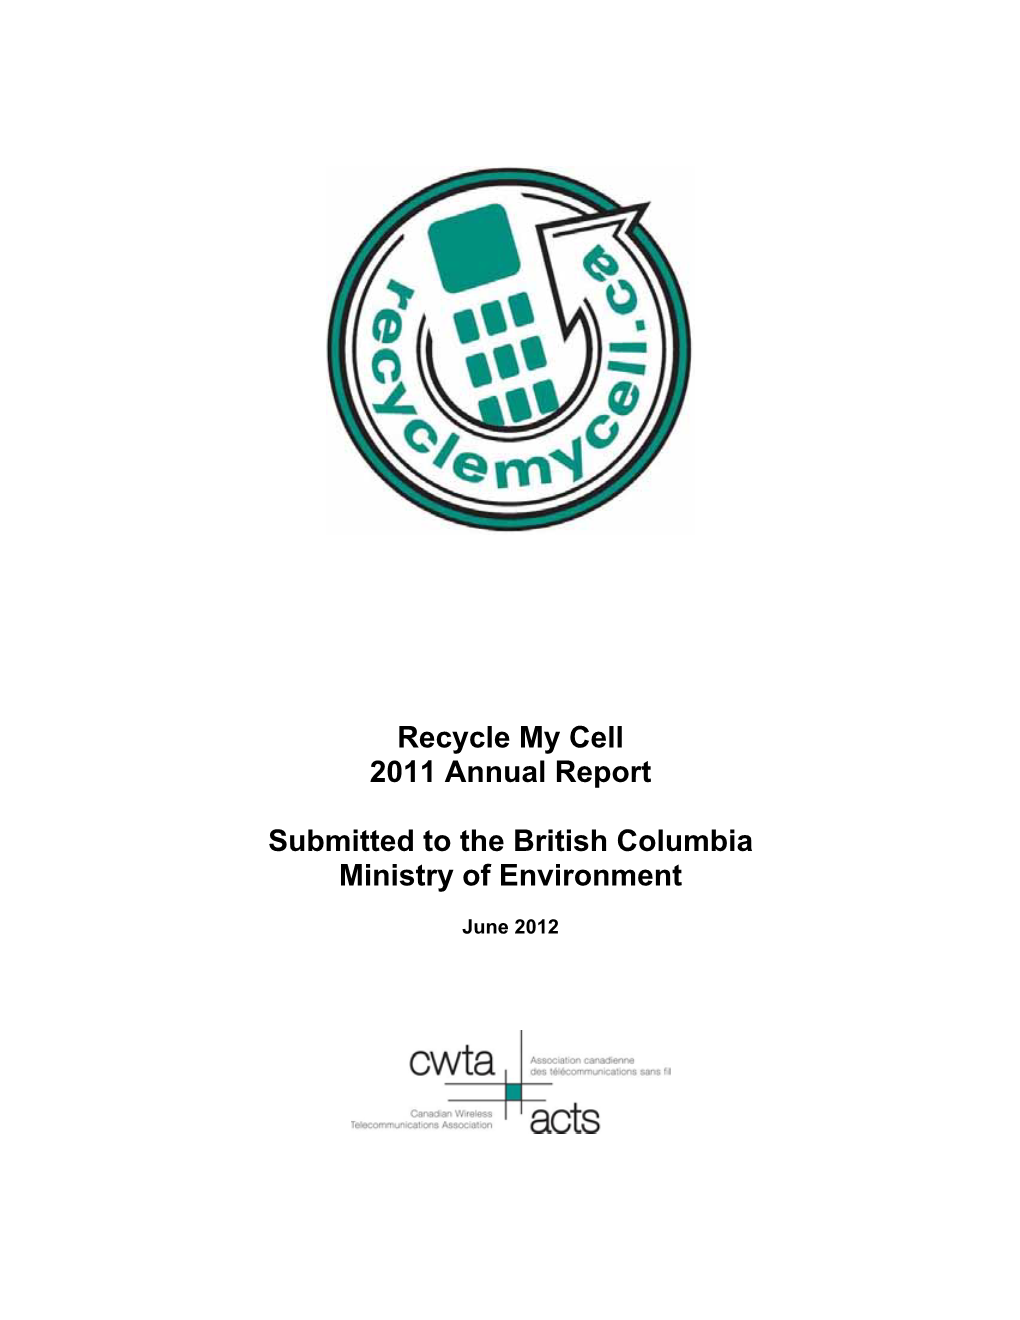 Recycle My Cell 2011 Annual Report Submitted to the British Columbia